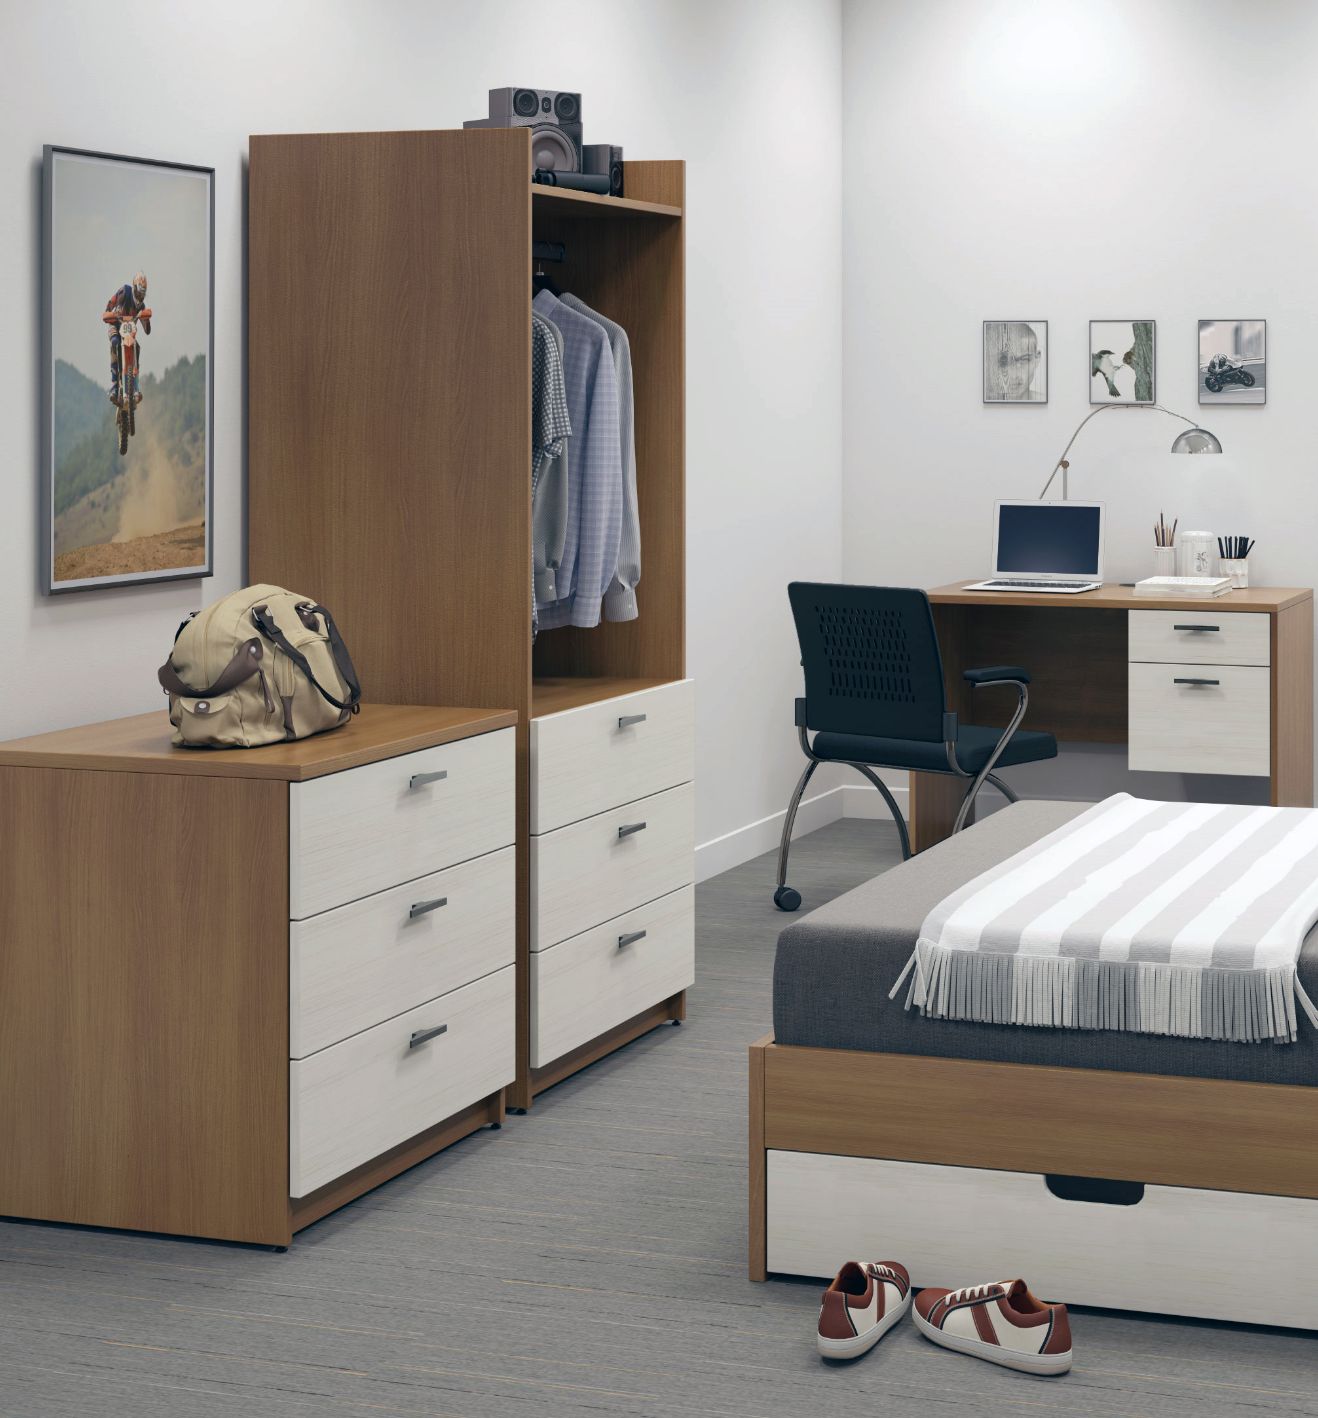 Bedroom with drawer storage unit